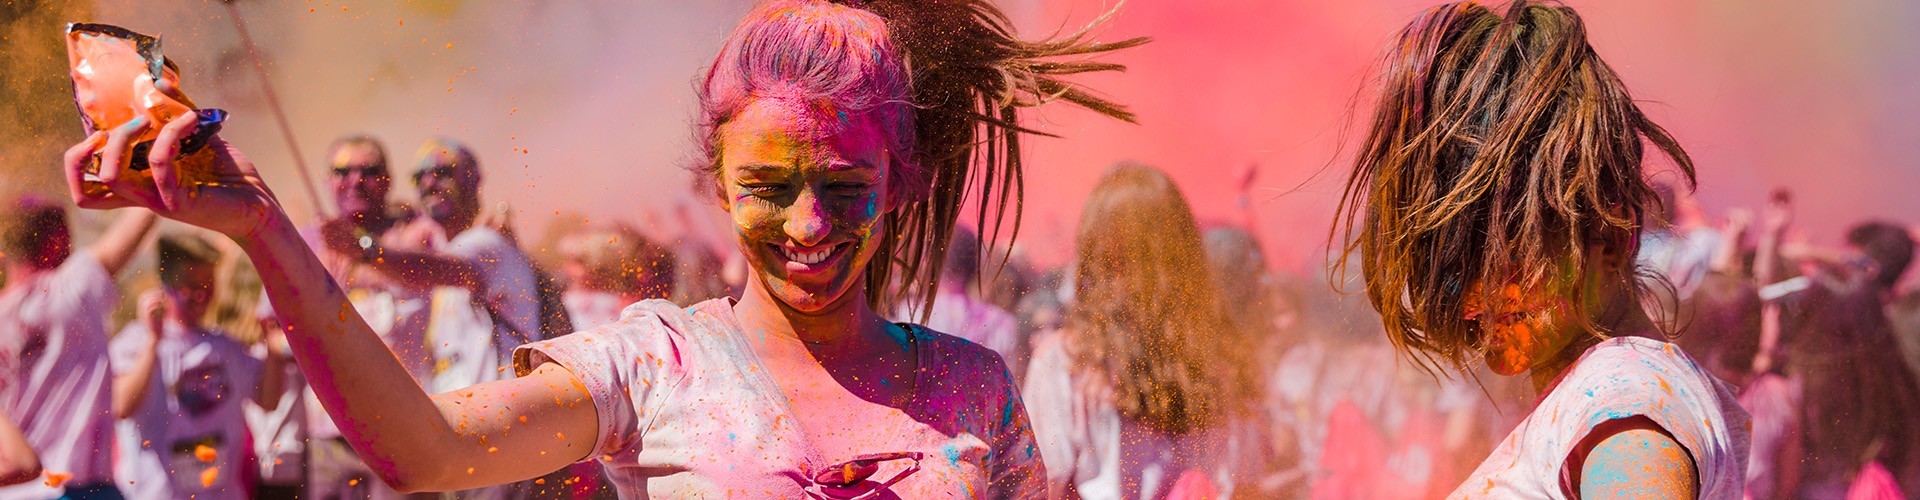 Holi Festival in Nepal, A festival of Colors